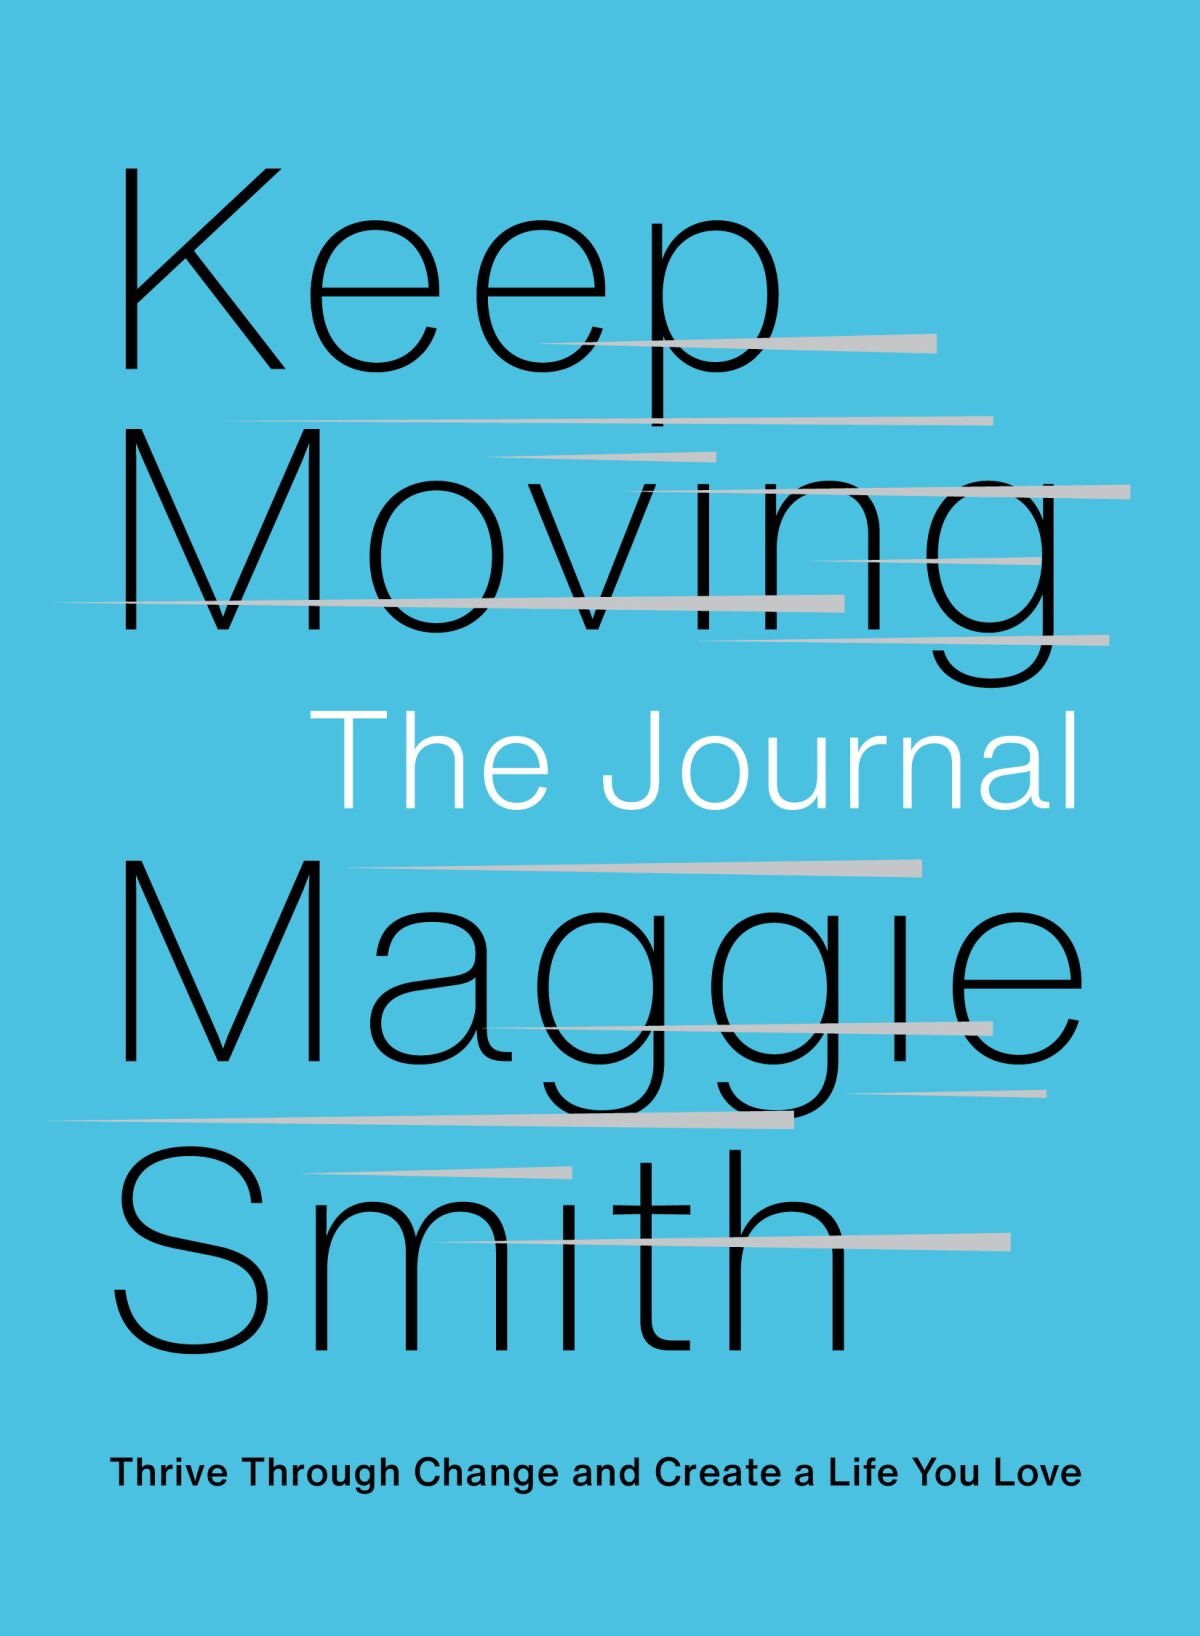 "Keep Moving: The Journal" by Maggie Smith